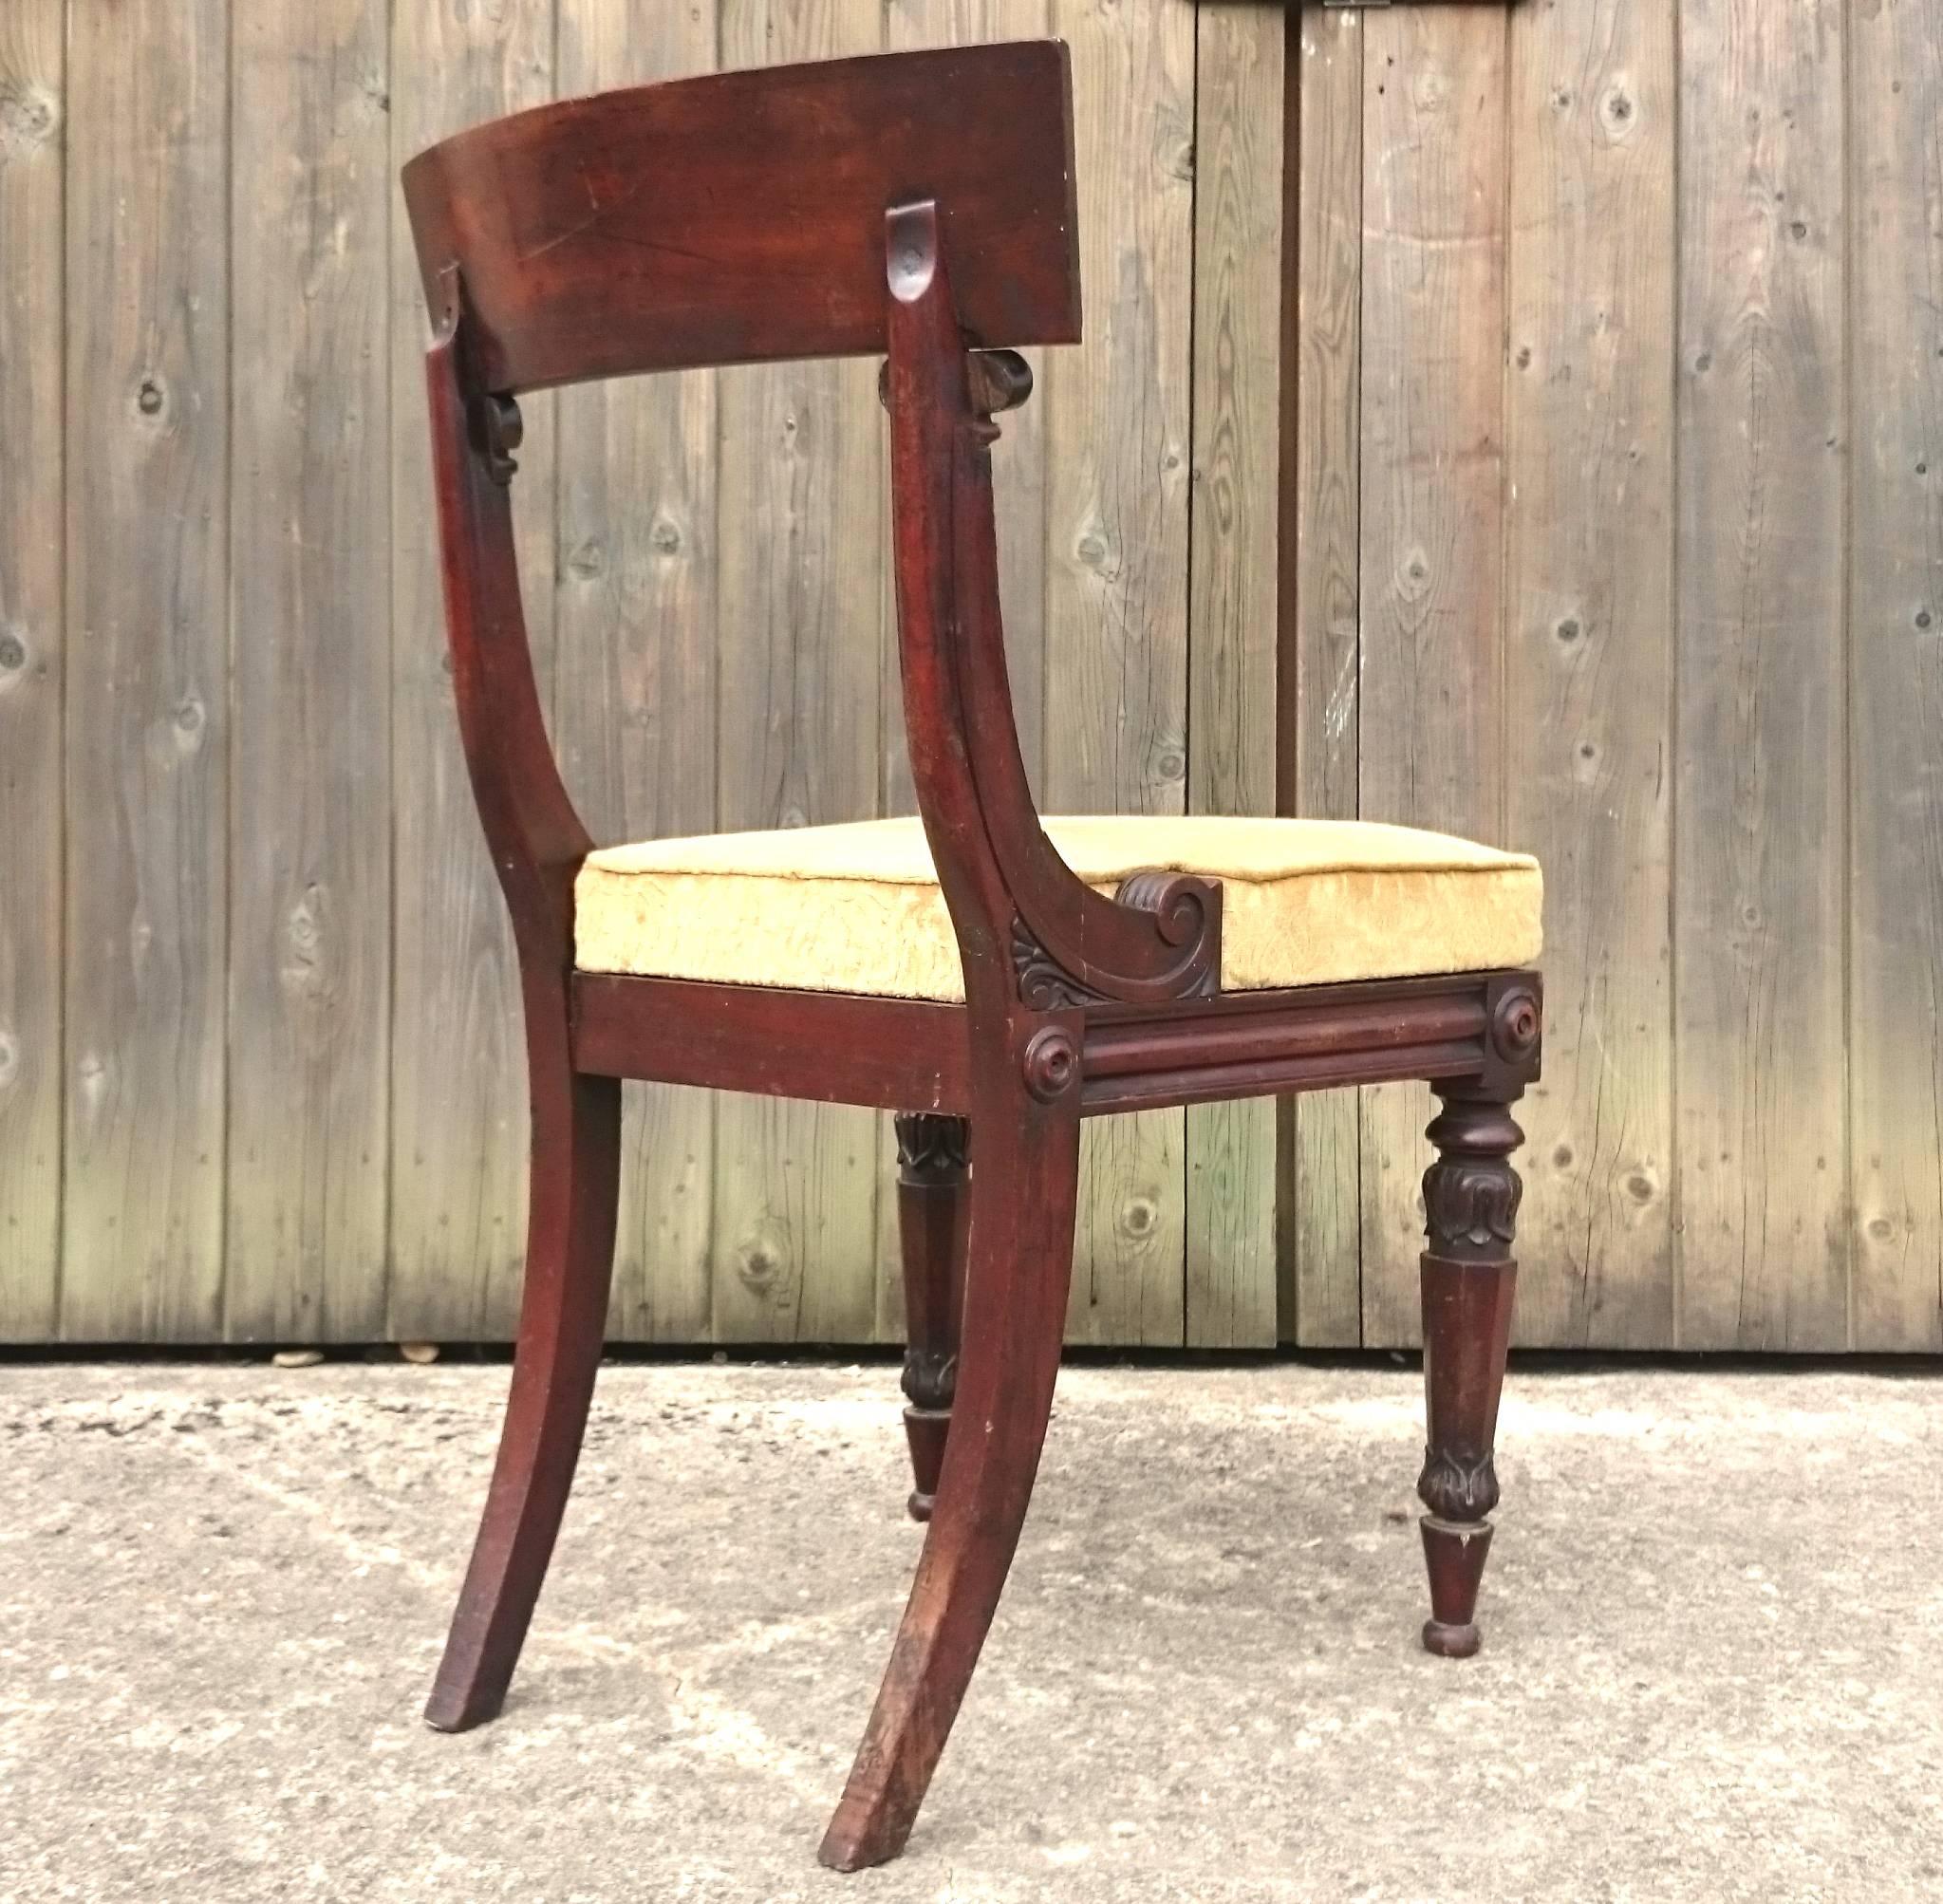 British Set of Six Regency Antique Chairs by James Winter of London, England